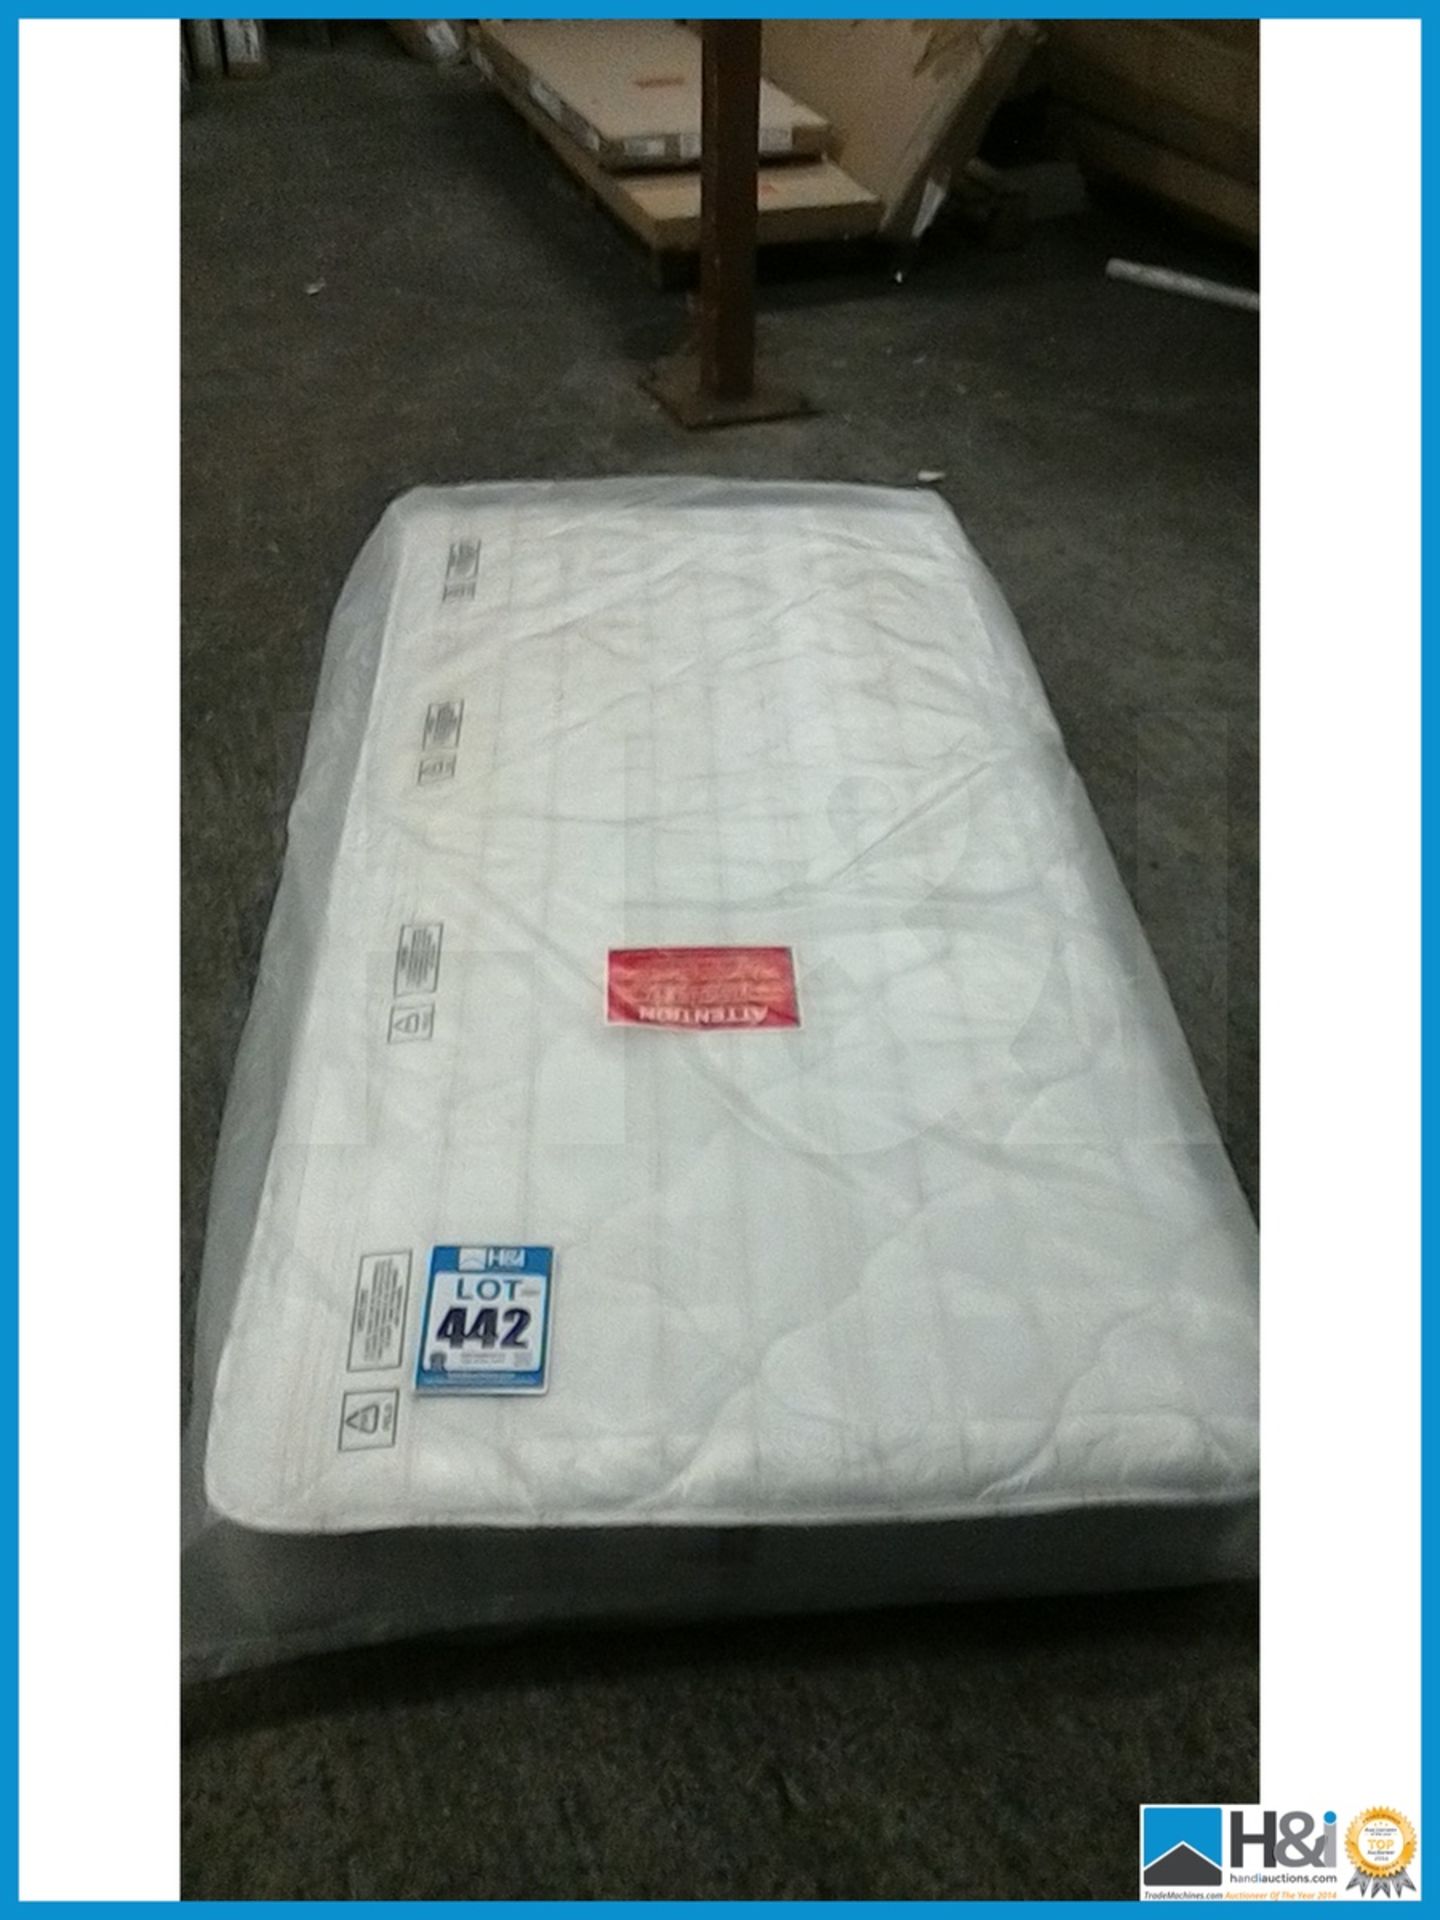 NEW IN BOX AIRSPRUNG ASHLEY SINGLE MATTRESS [] 16 x 90 x 190cm RRP £194 Appraisal: Viewing Essential - Image 2 of 2